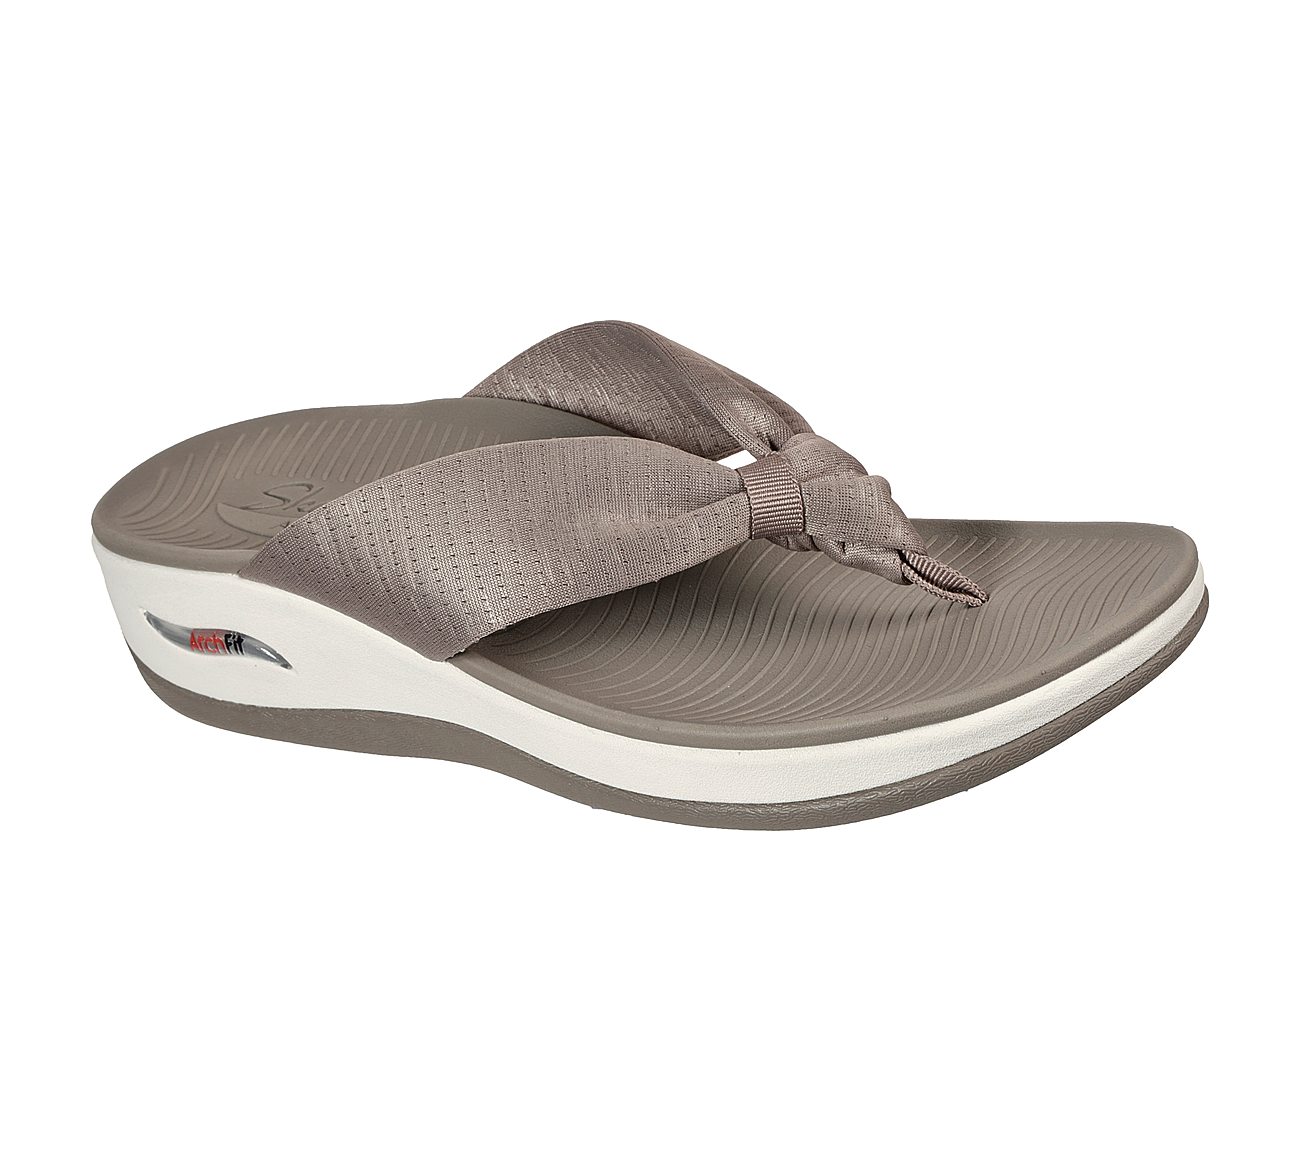 ARCH FIT SUNSHINE - MY LIFE, DARK TAUPE Footwear Lateral View